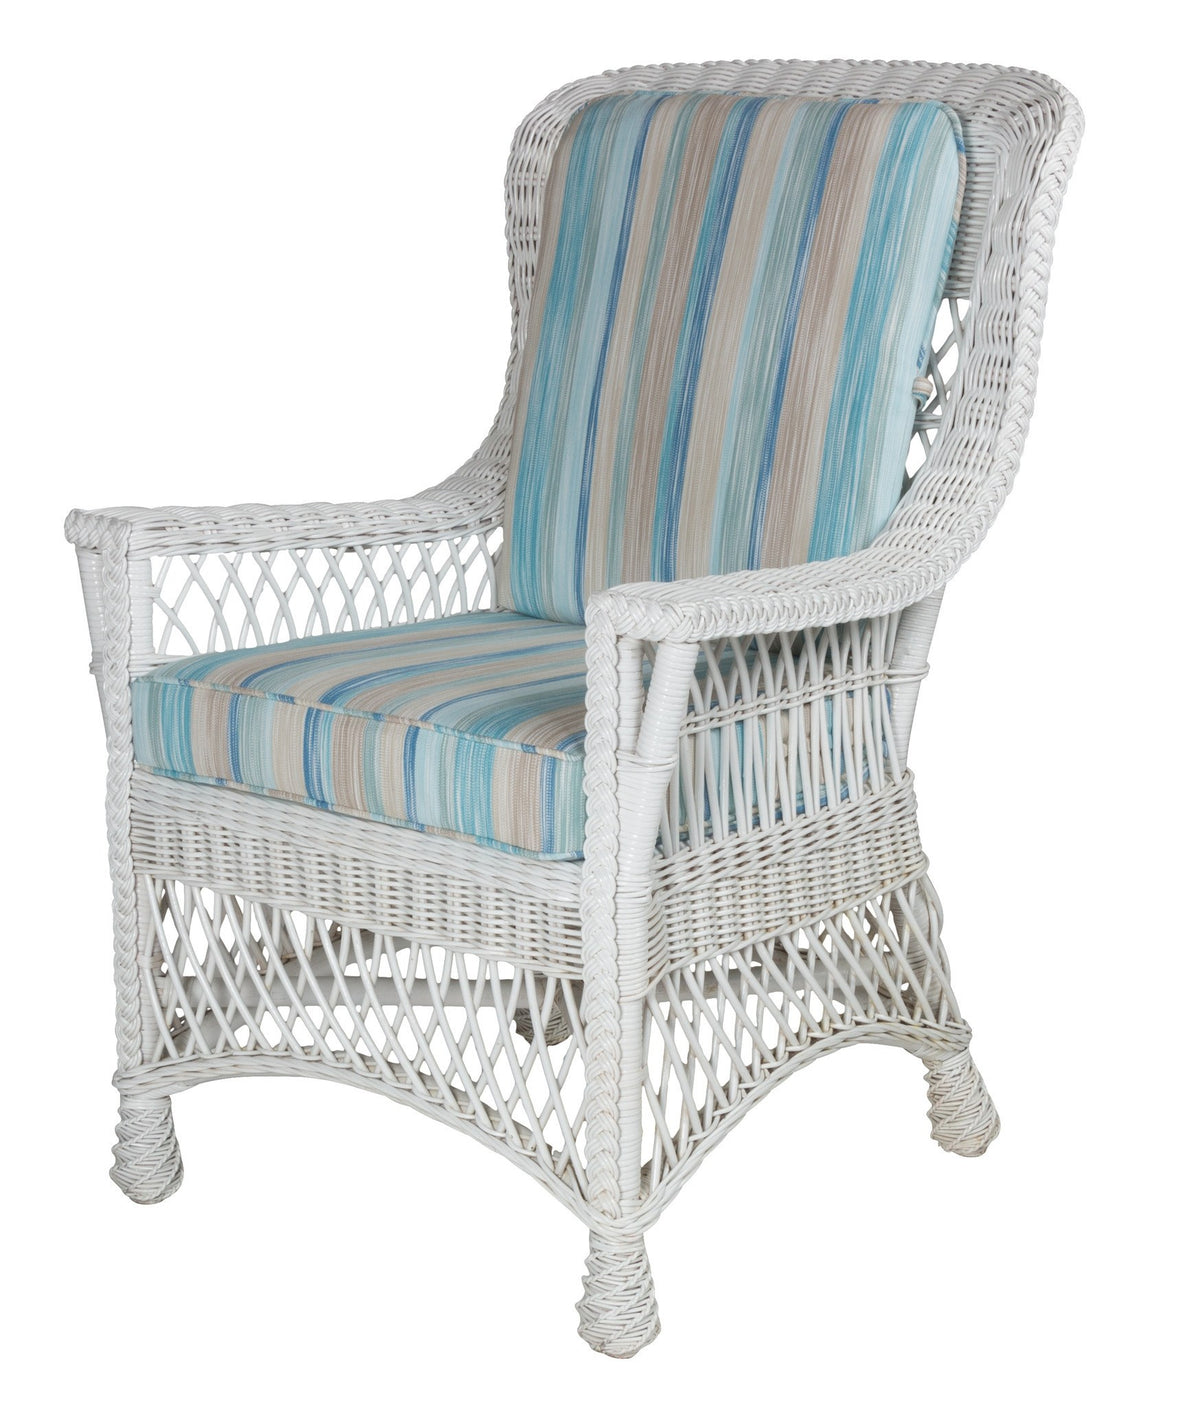 Designer Wicker &amp; Rattan By Tribor Rockport Dining Arm Chair Dining Chair - Rattan Imports